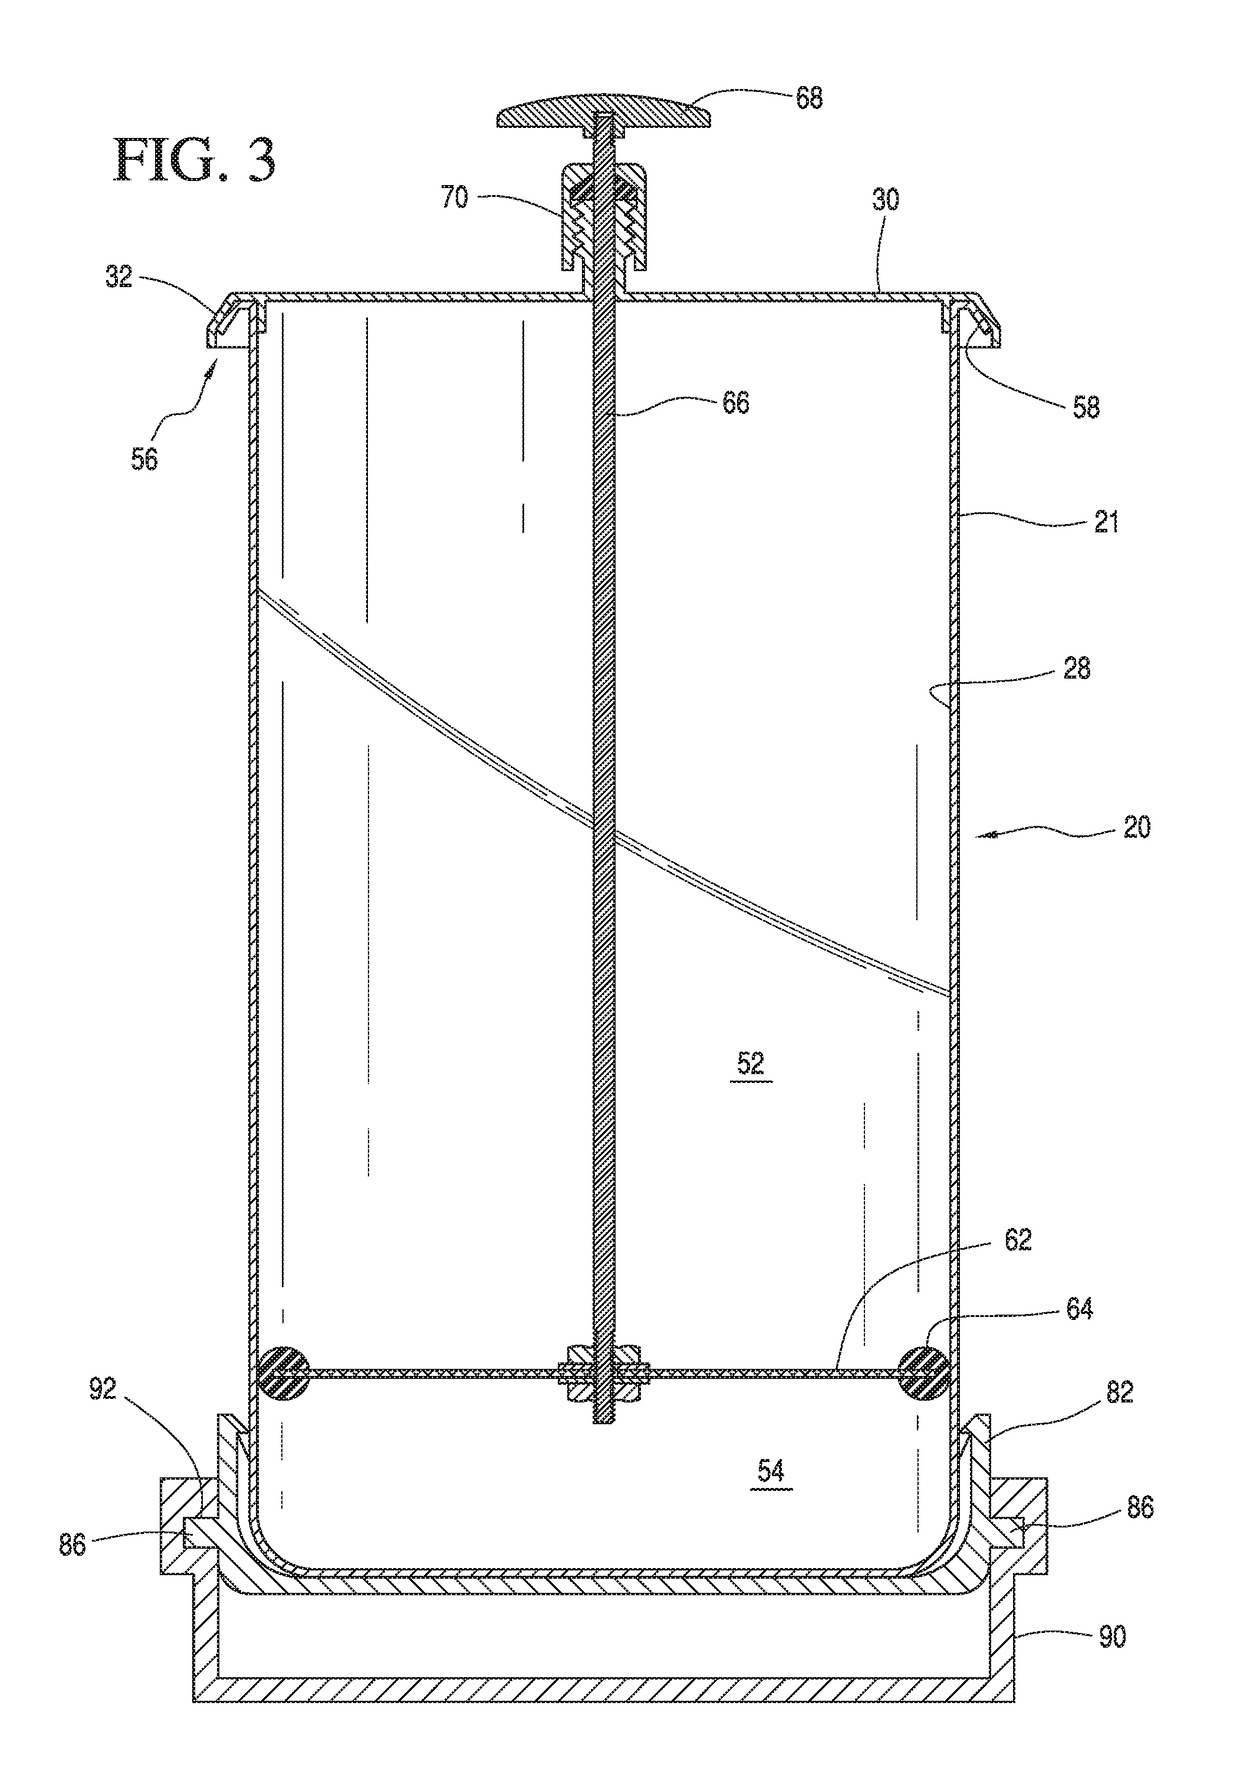 Adipose tissue separation device and methods